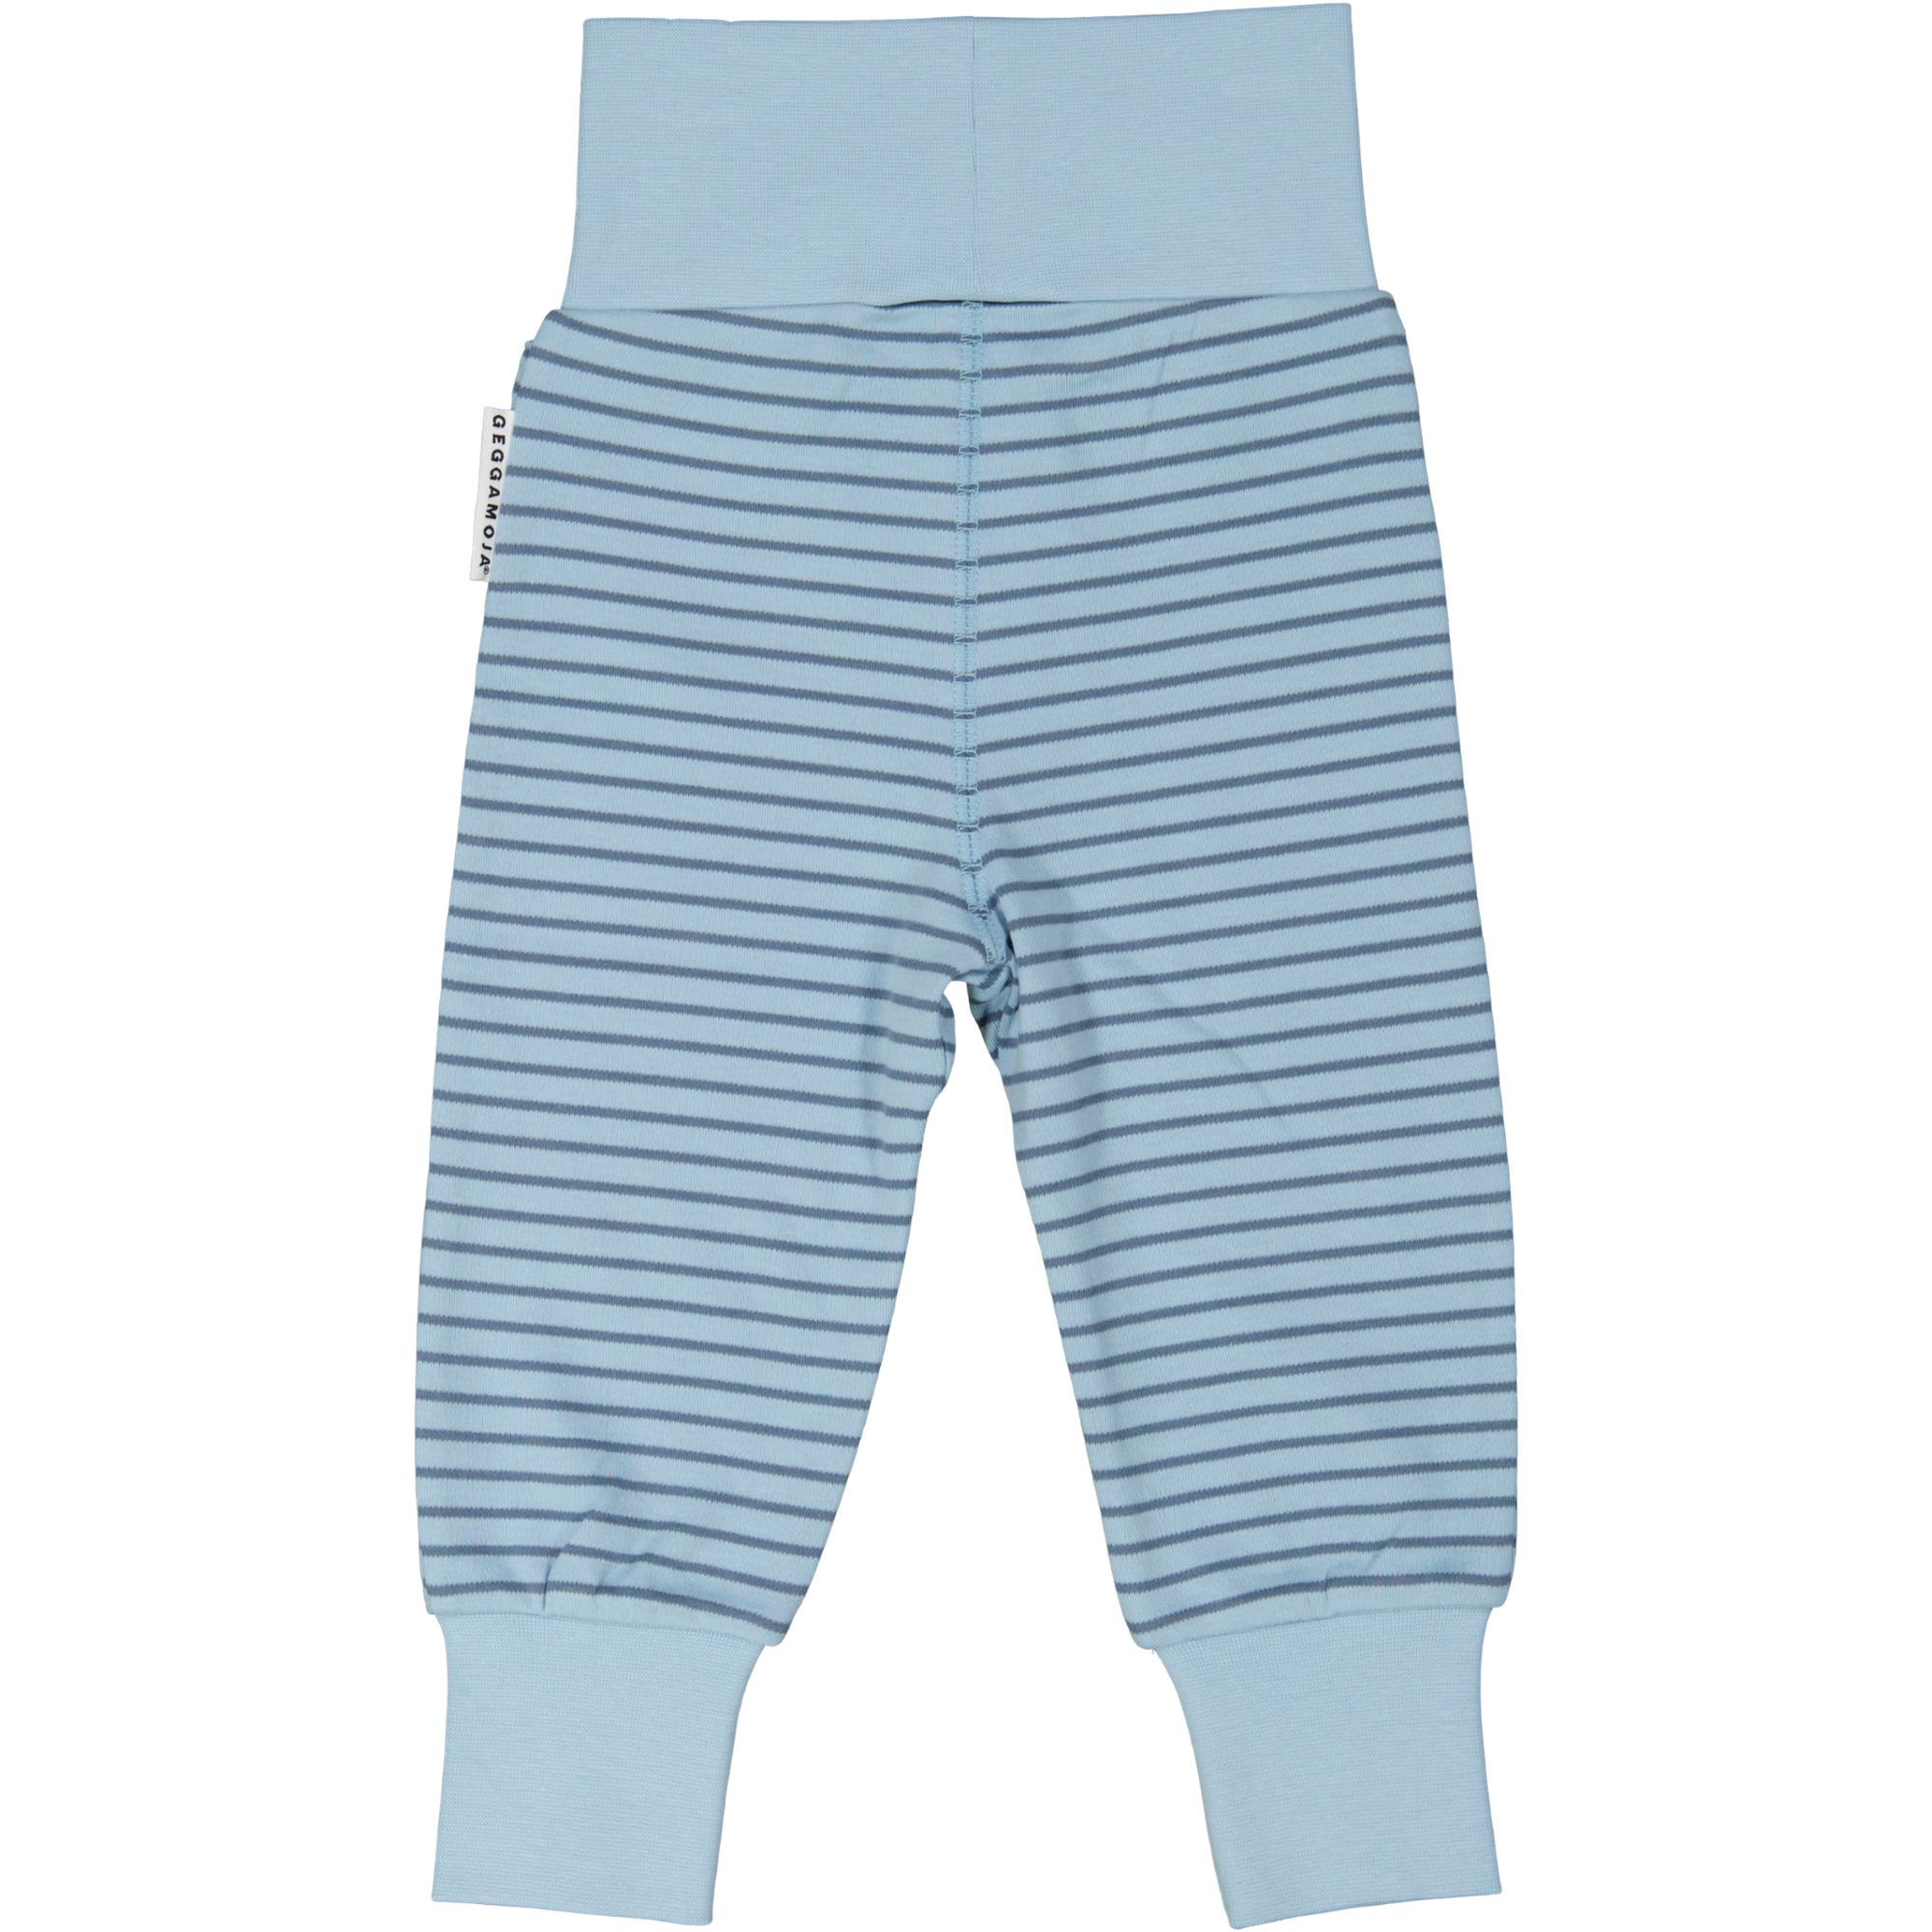 Baby trousers L.blue/blue 14